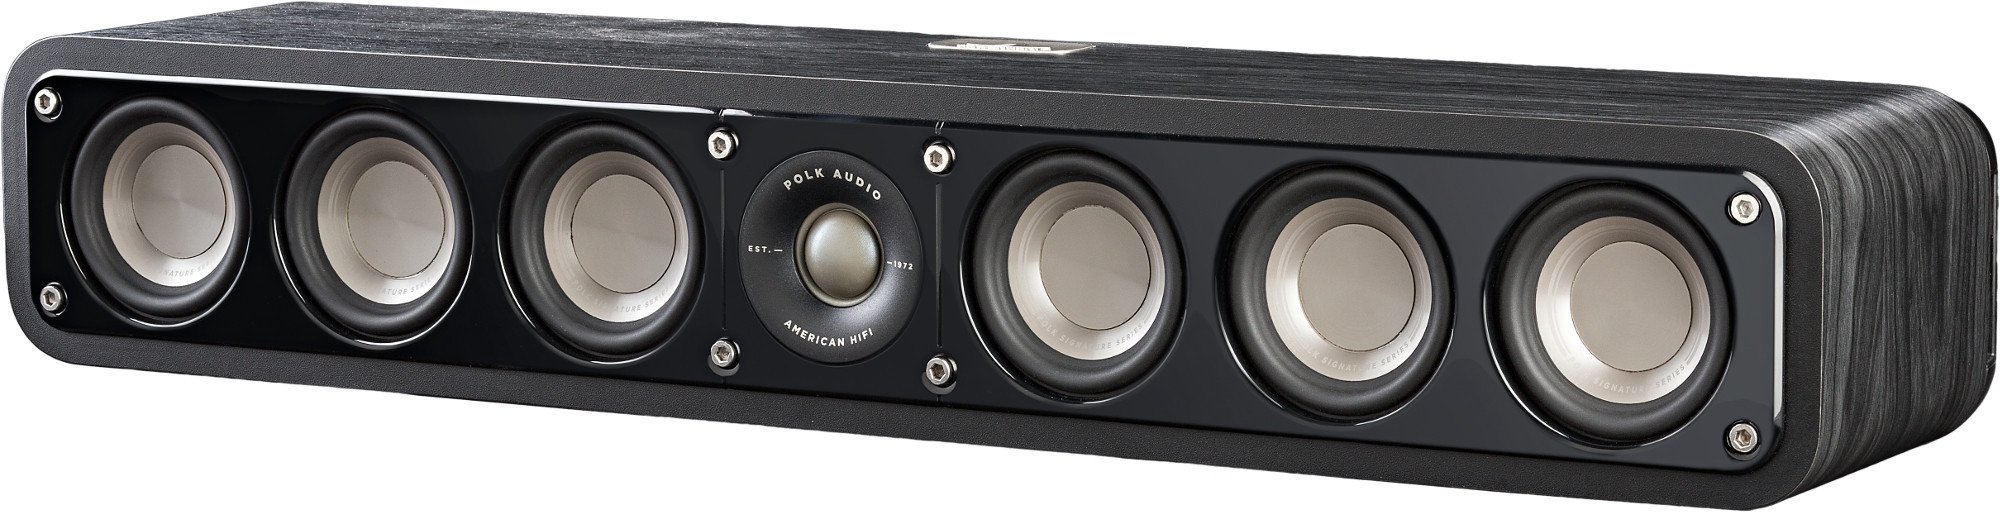 The Polk Audio Signature Series S35 Review